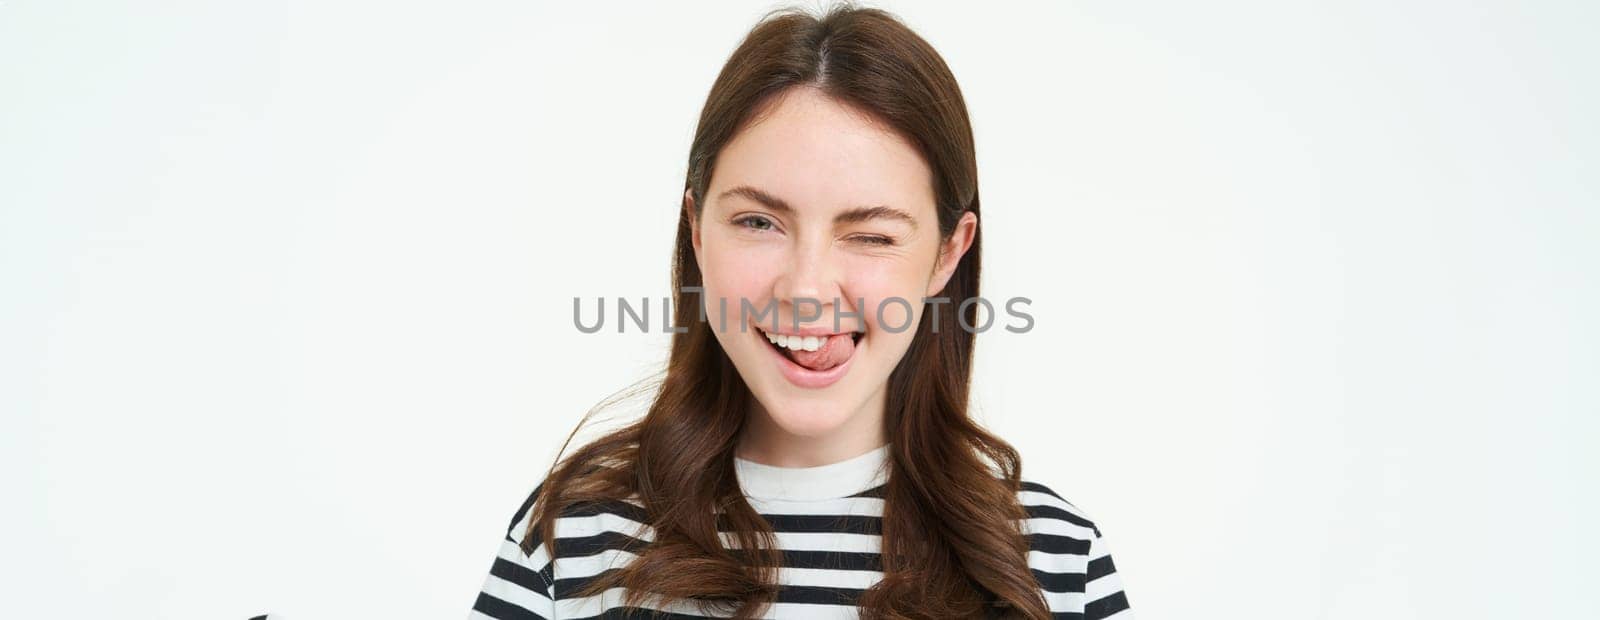 Portrait of happy, beautiful young woman, smiles and winks at you, stands over white background.